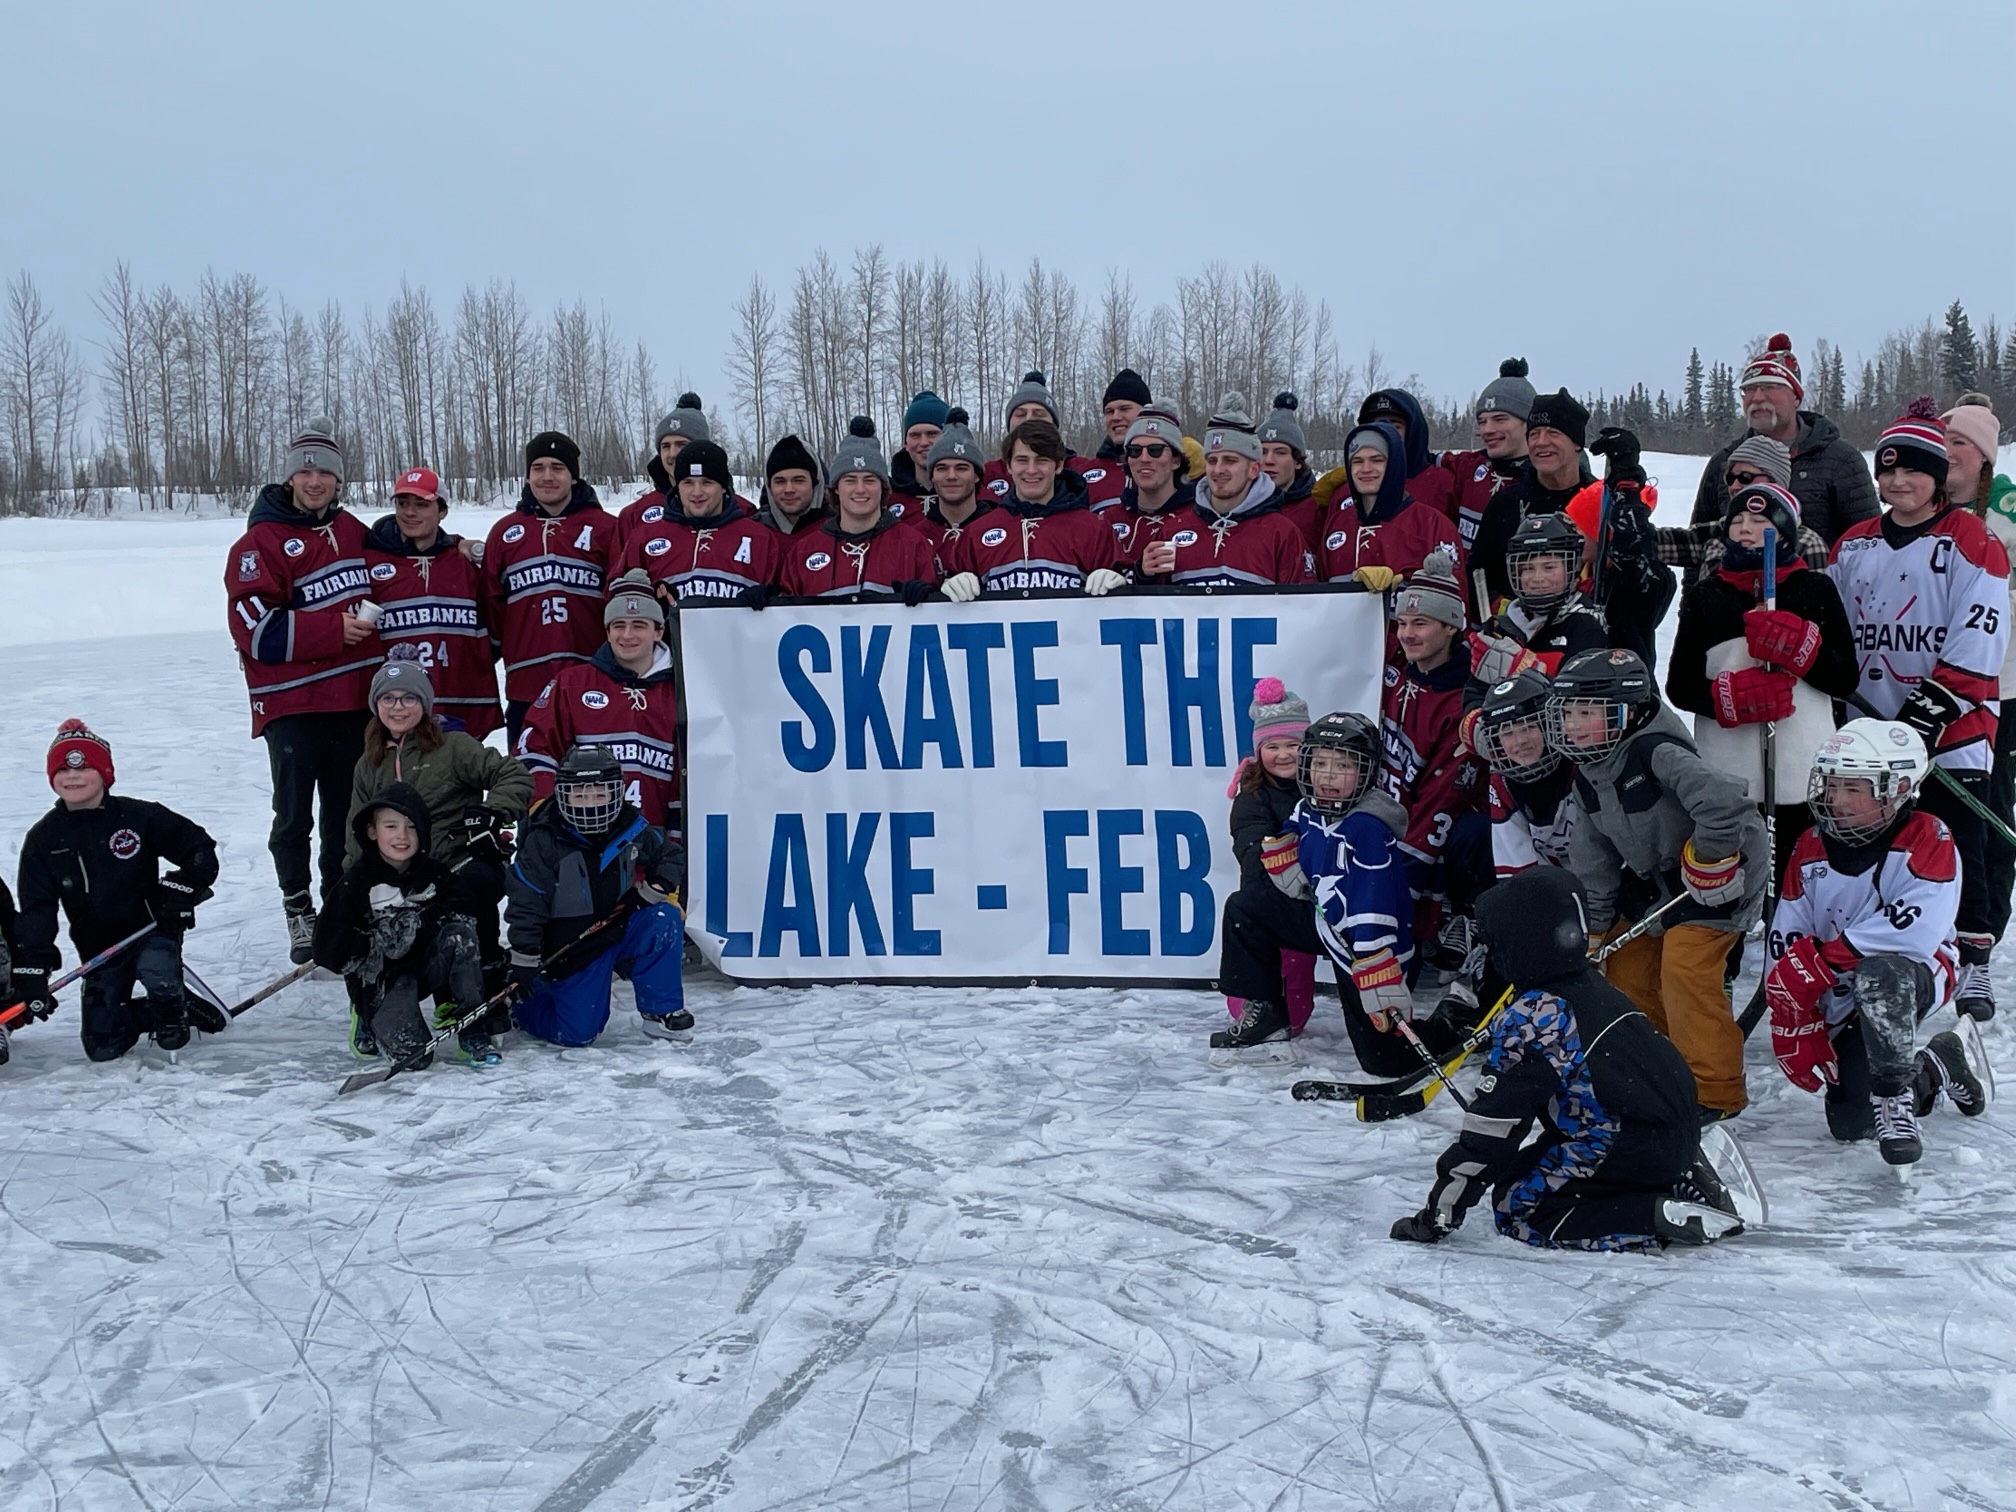 Fairbanks Ice Dogs on X: Introducing your 2021 Alaska Airlines Cup  champions. Your Ice Dogs finished their 48-game NAHL regular season with a  record of 25-19-2-2, good for 54 points and 2nd